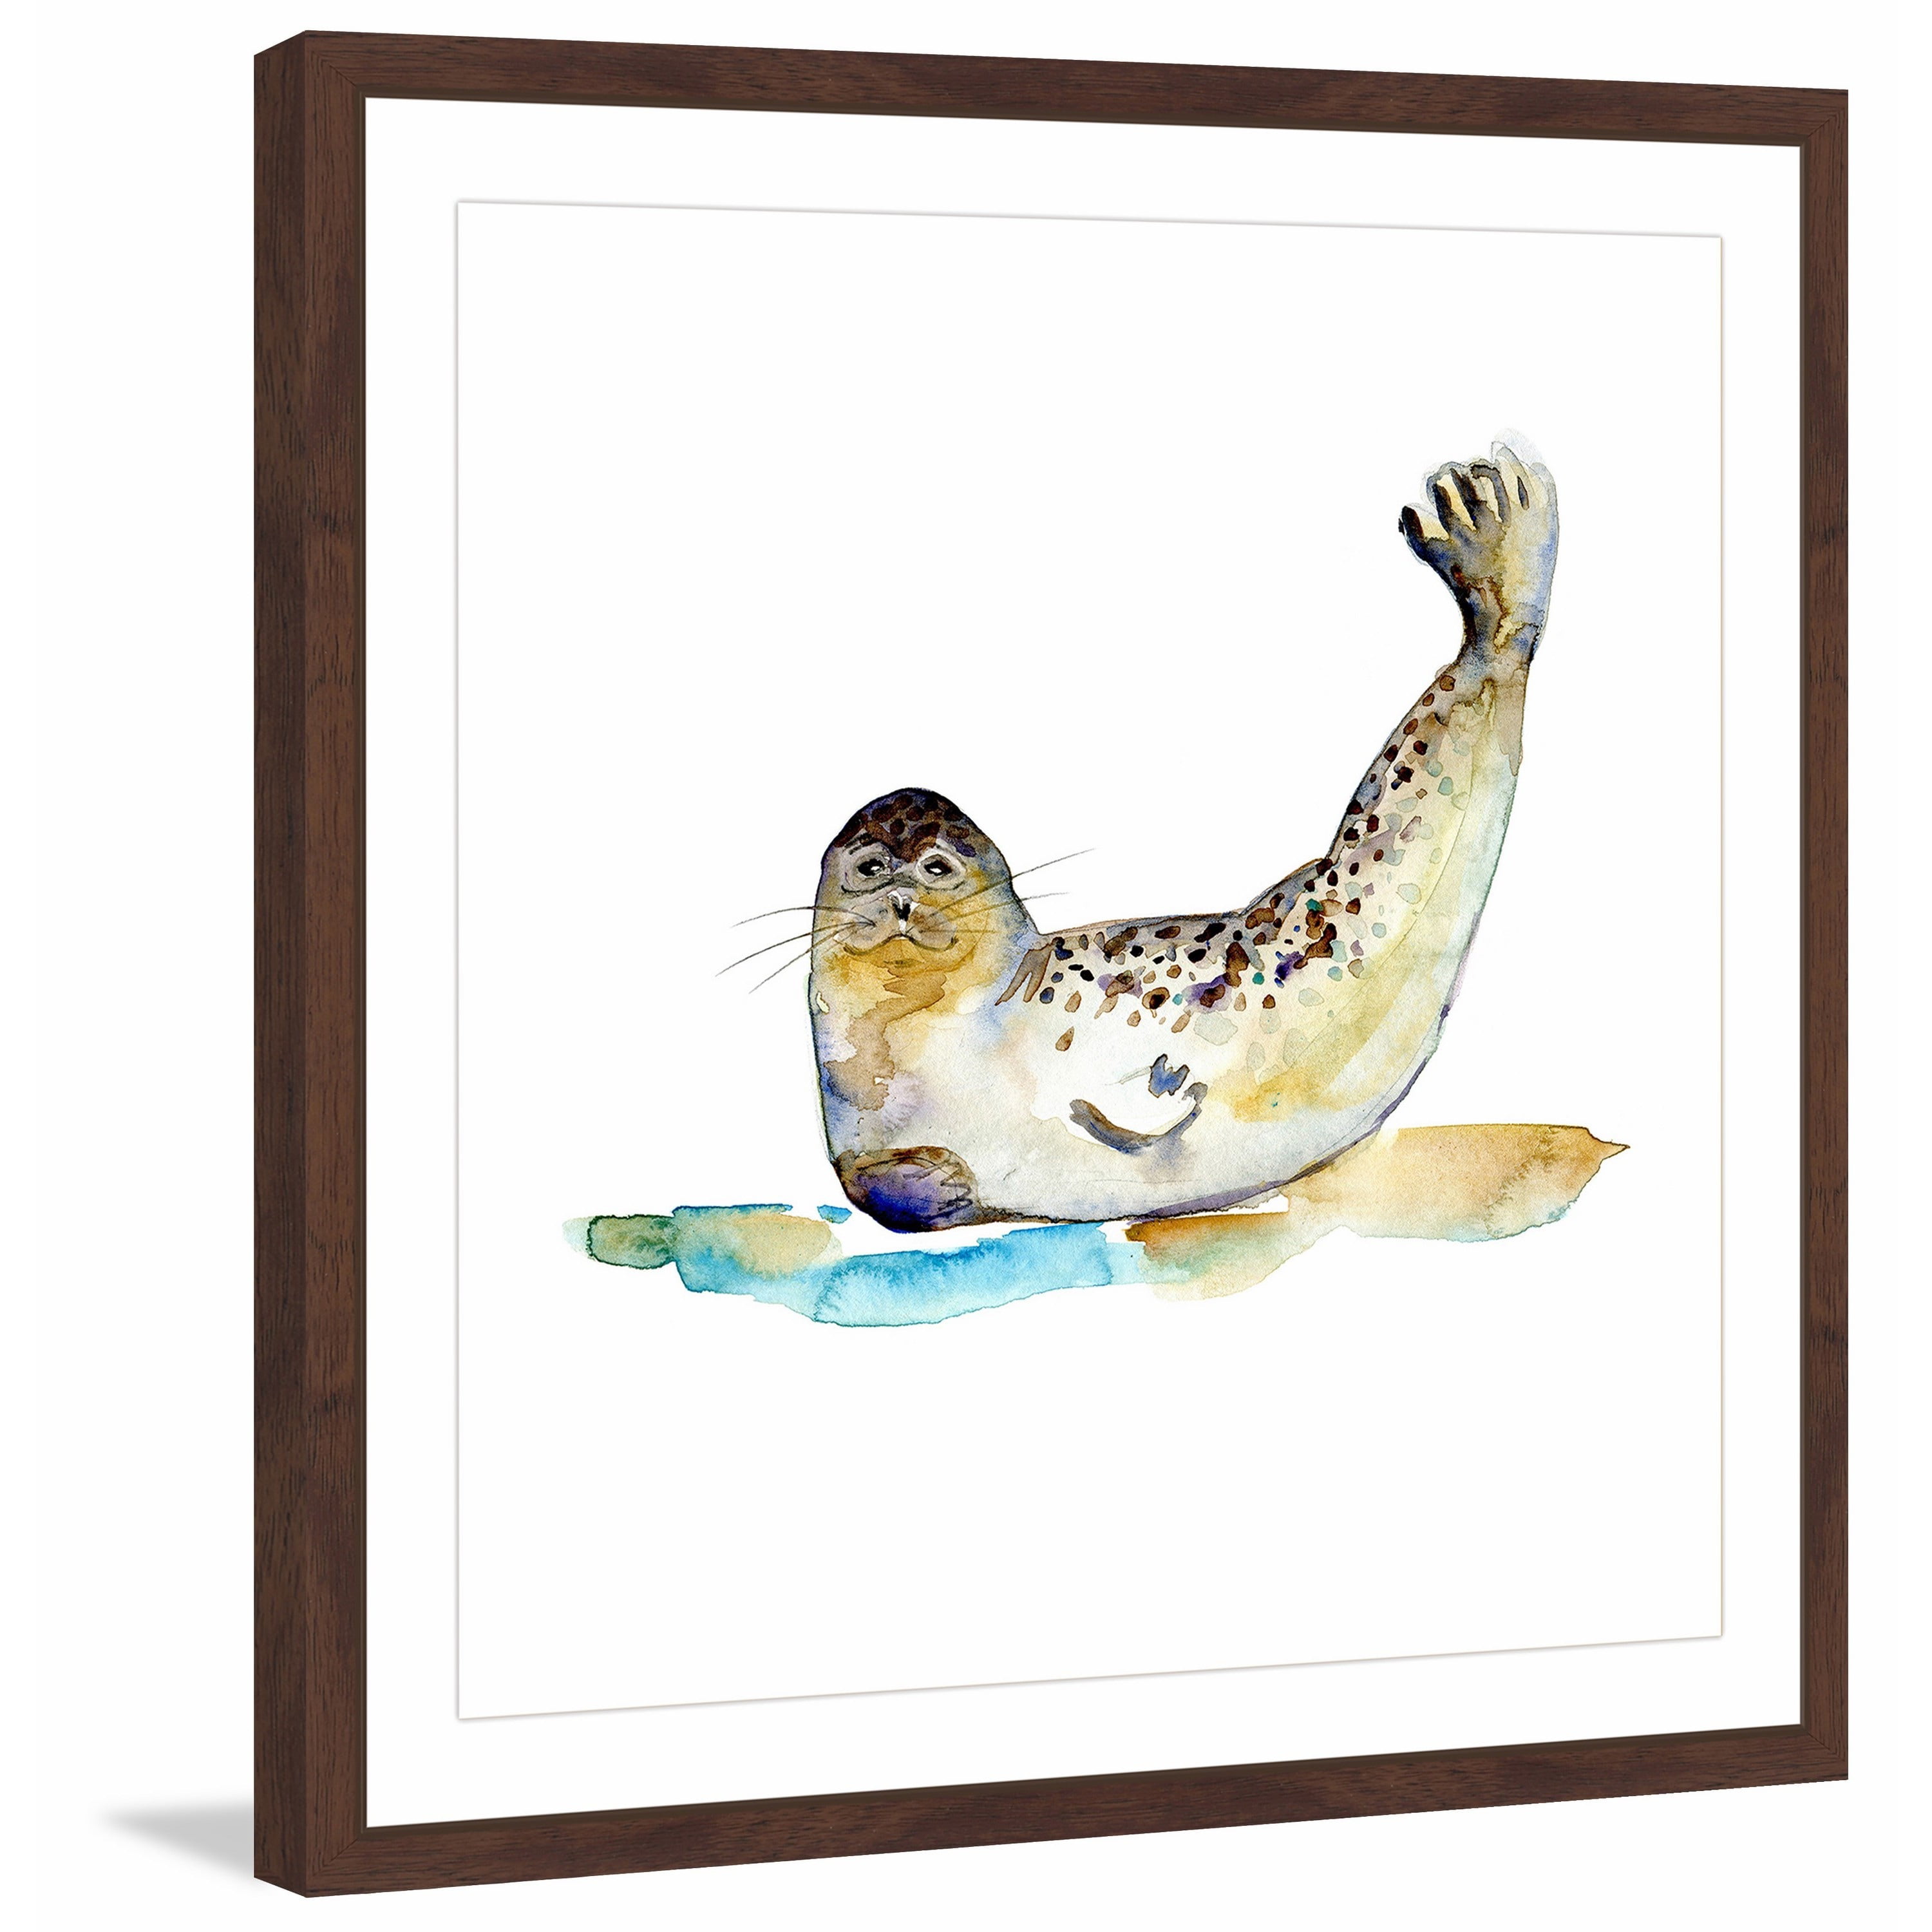 Poster print of illustrated watercolor SEA LION from World Map by Marley Ungaro